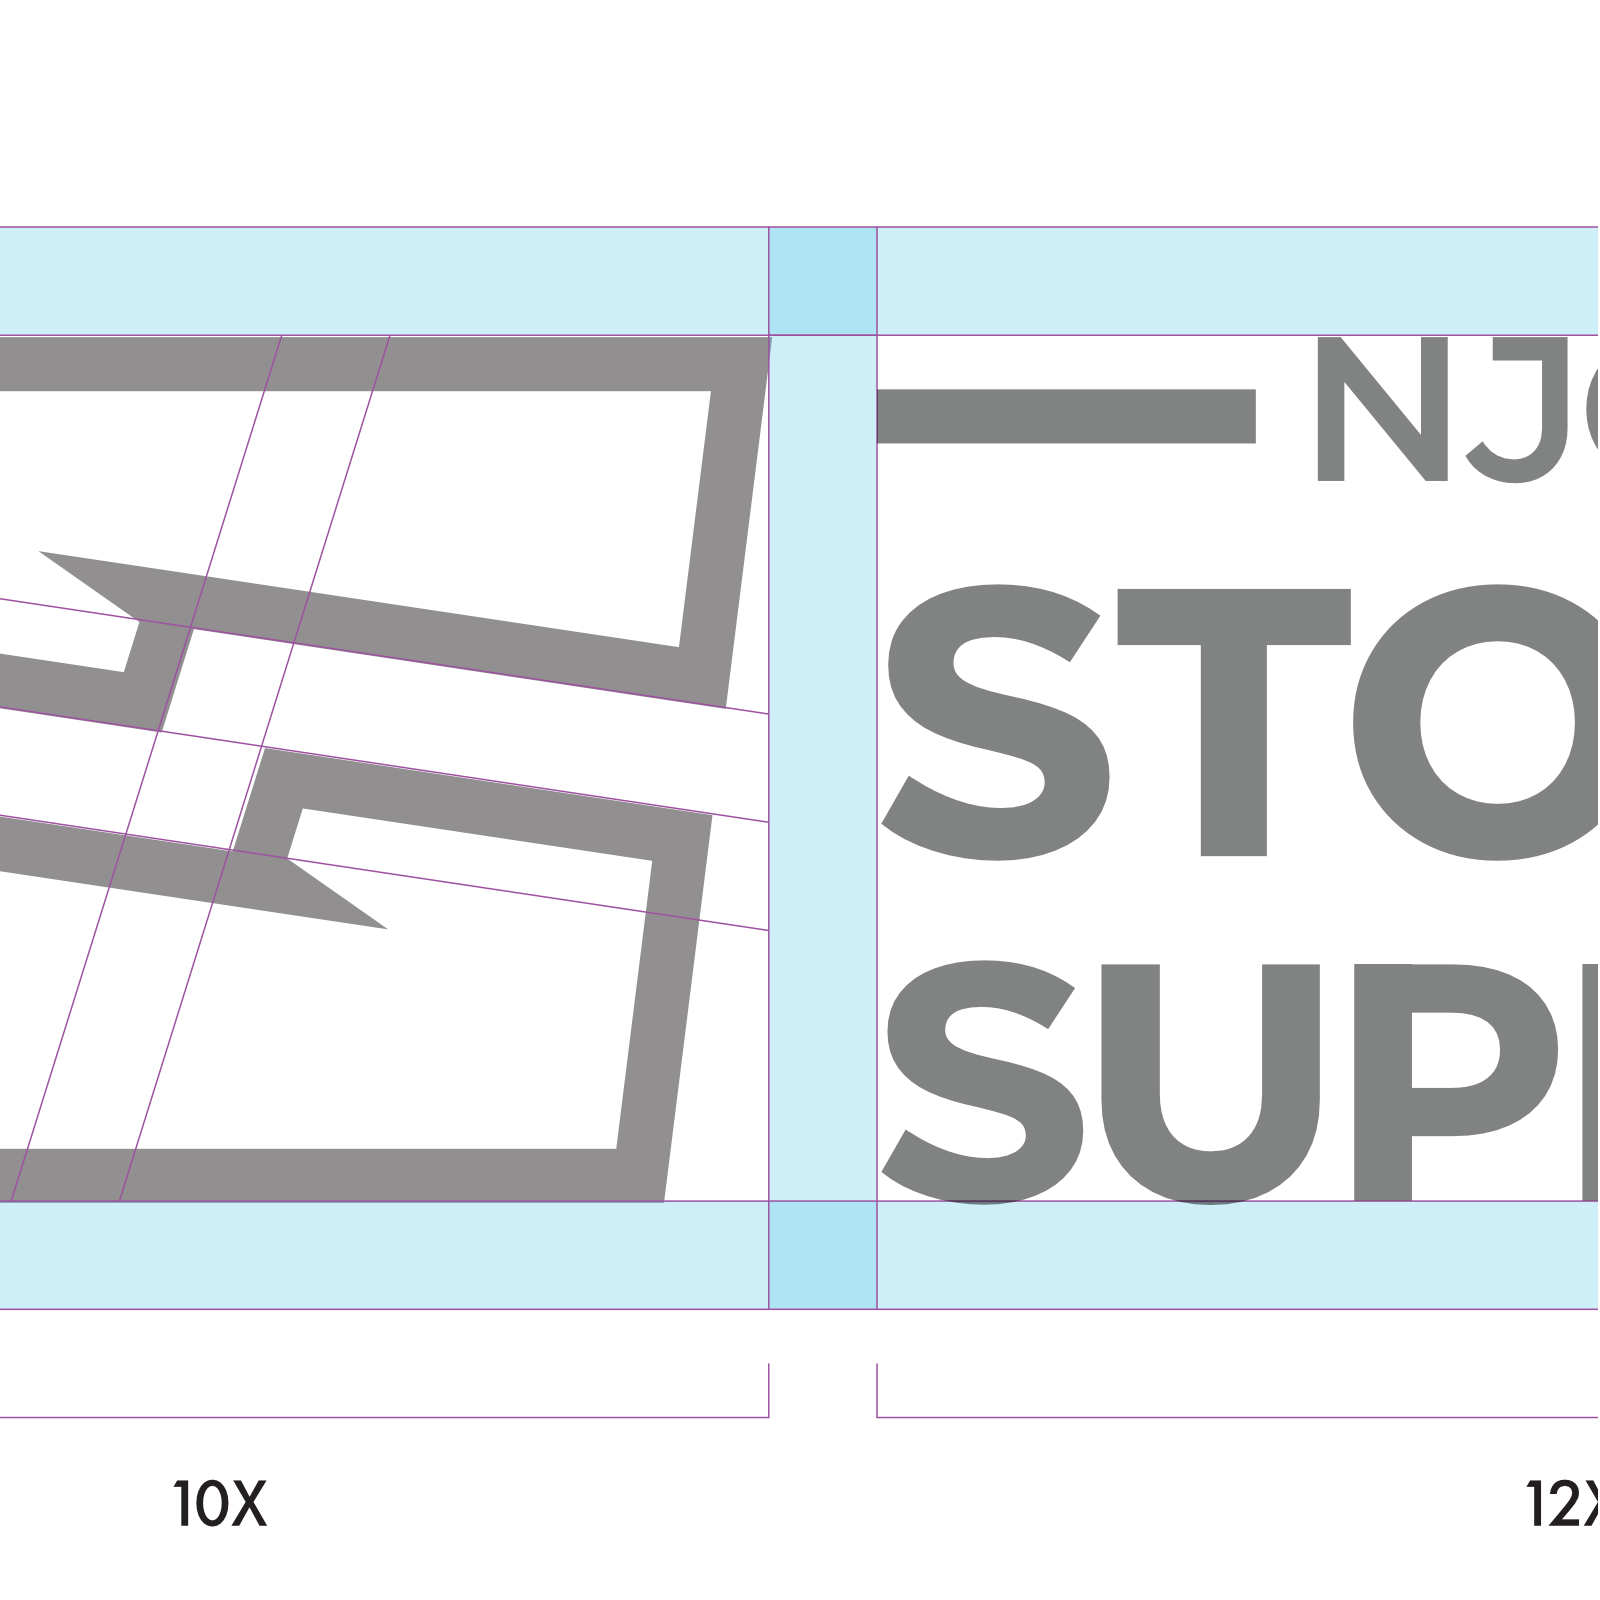 Screenshot of the grid used for one of the Noah James Curtis Stone Supply logos with type